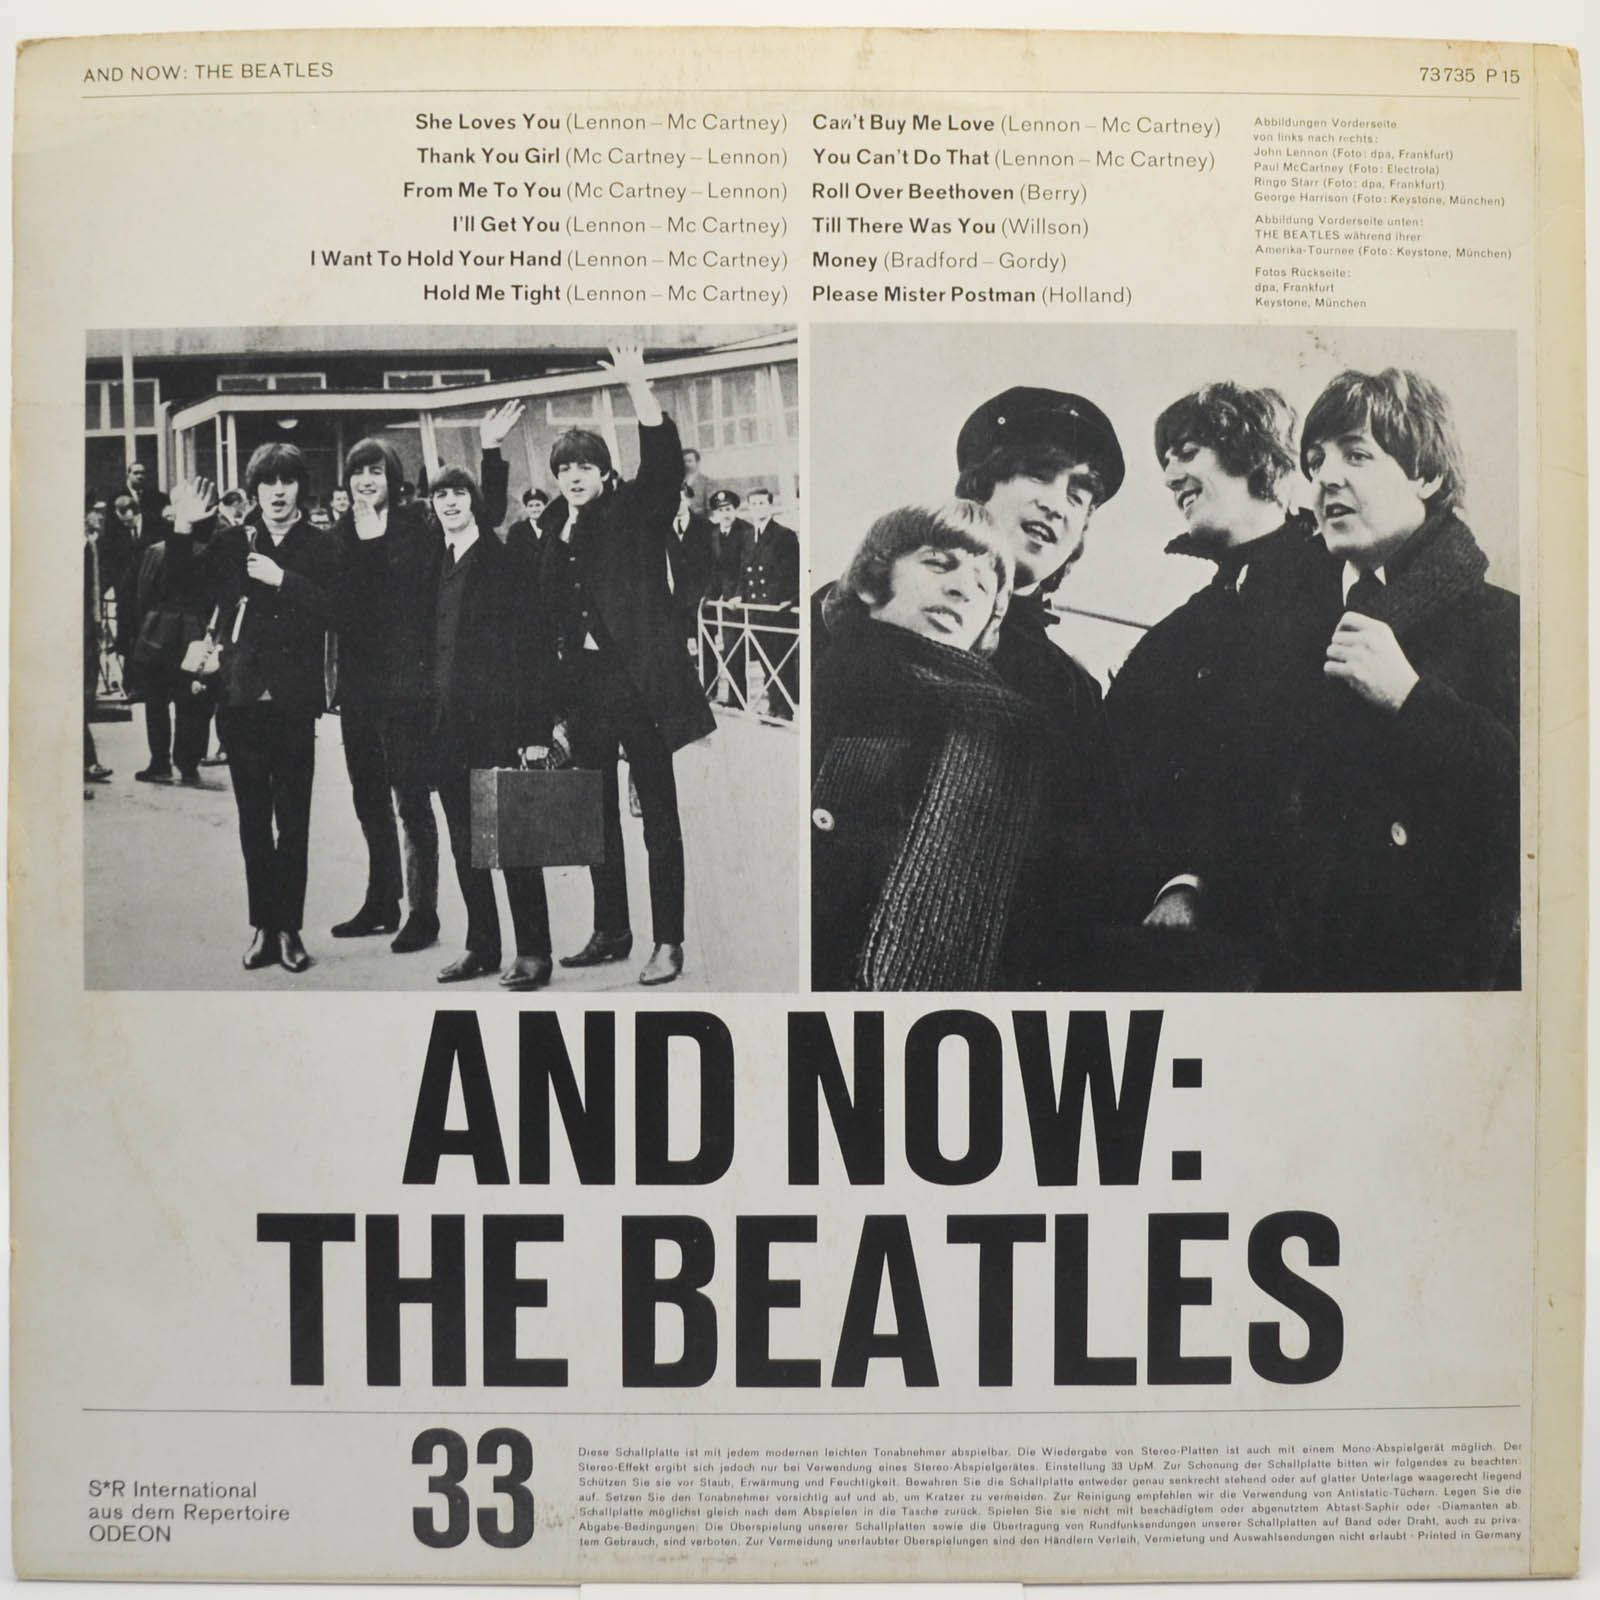 Now and then Beatles. The Beatles Now and then обложки. The beatles перевод песен